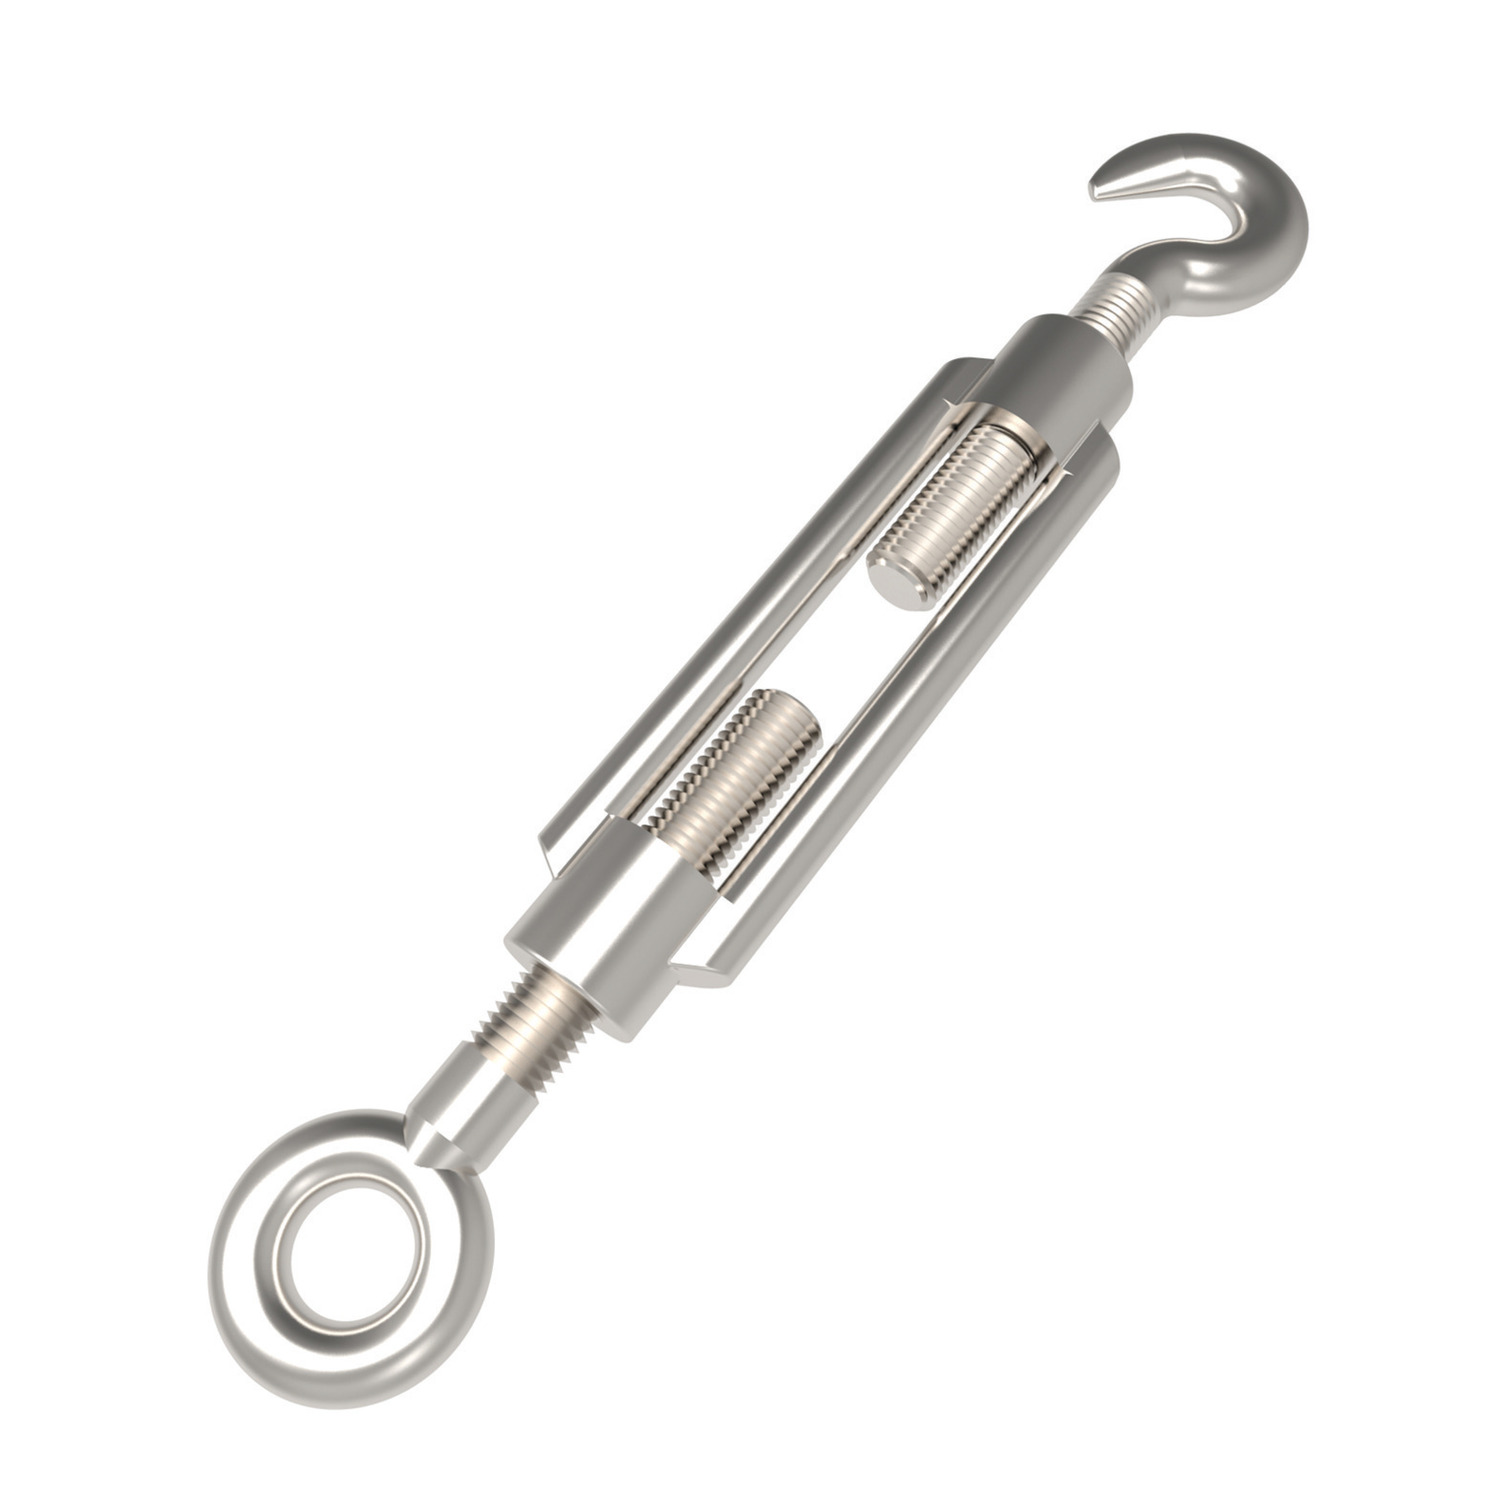 Hook & Eye Turnbuckles A4 Stainless steel open turnbuckles with hook & eye ends. Manufactured to DIN 1480 hook & eye. Sizes from M6 to M16.